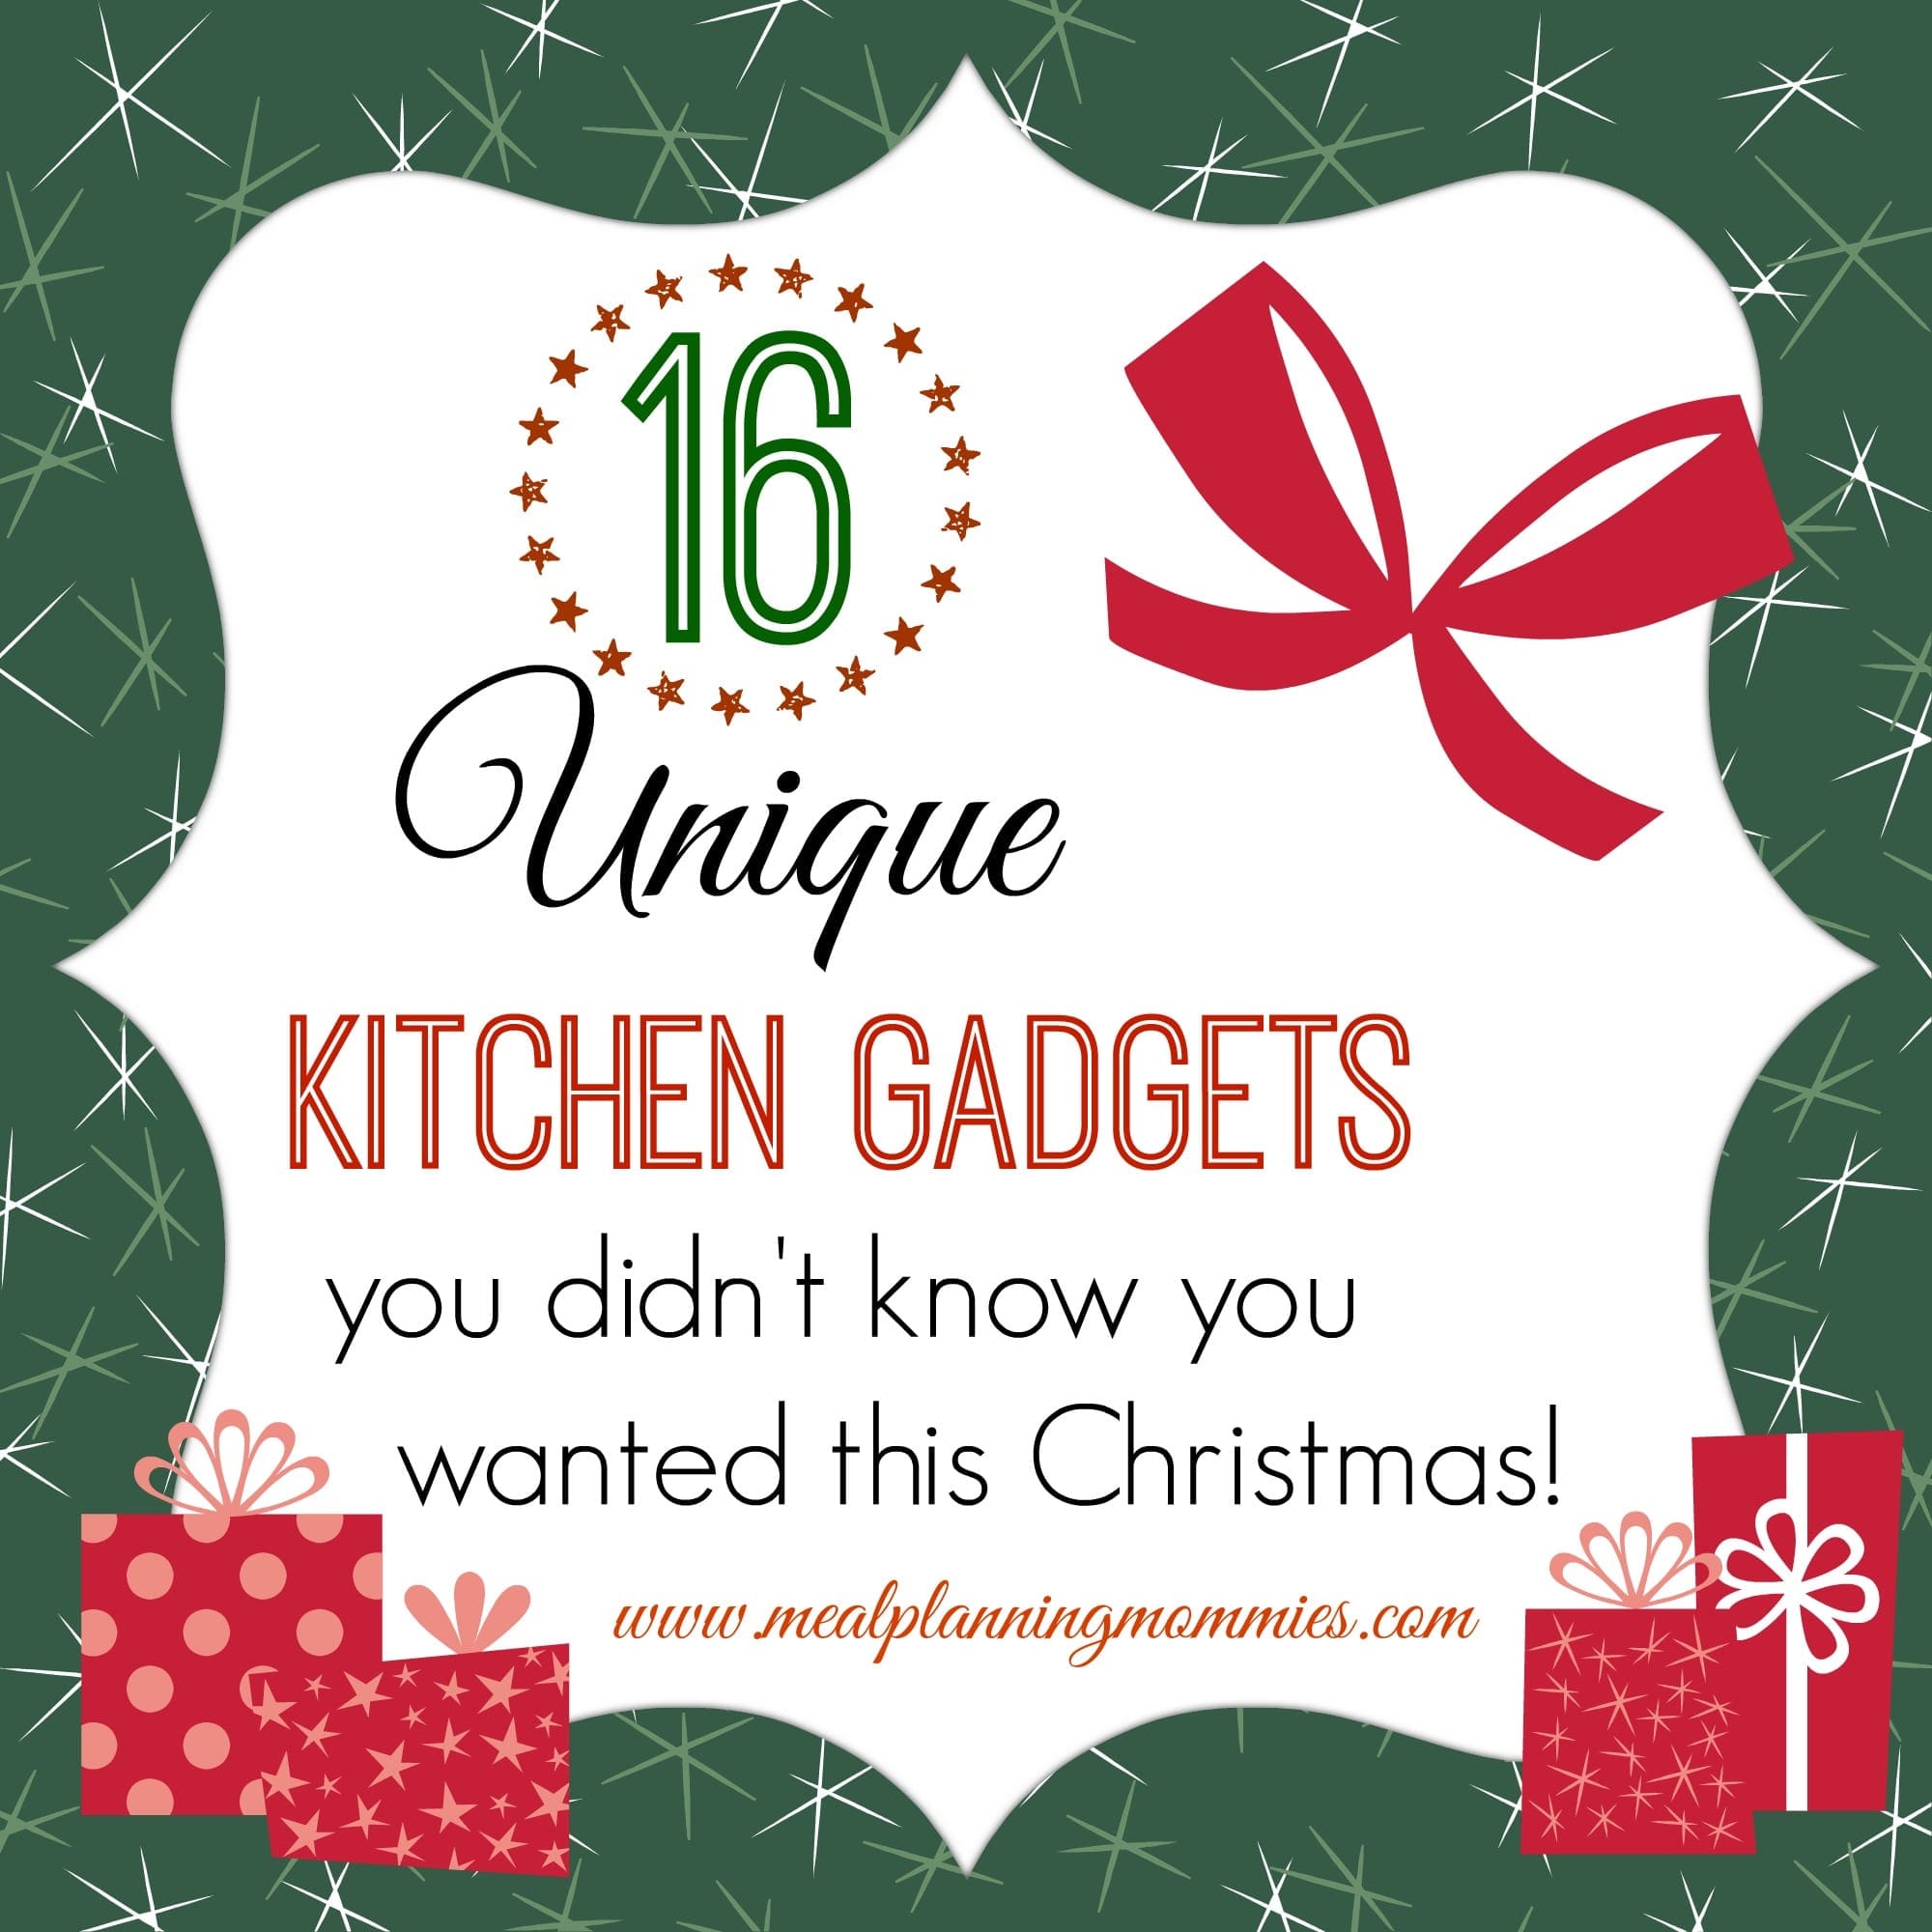 http://mealplanningmommies.com//wp-content/uploads/2015/11/16-Unique-Kitchen-Gadgets-you-didnt-know-you-wanted-this-Christmas.jpg